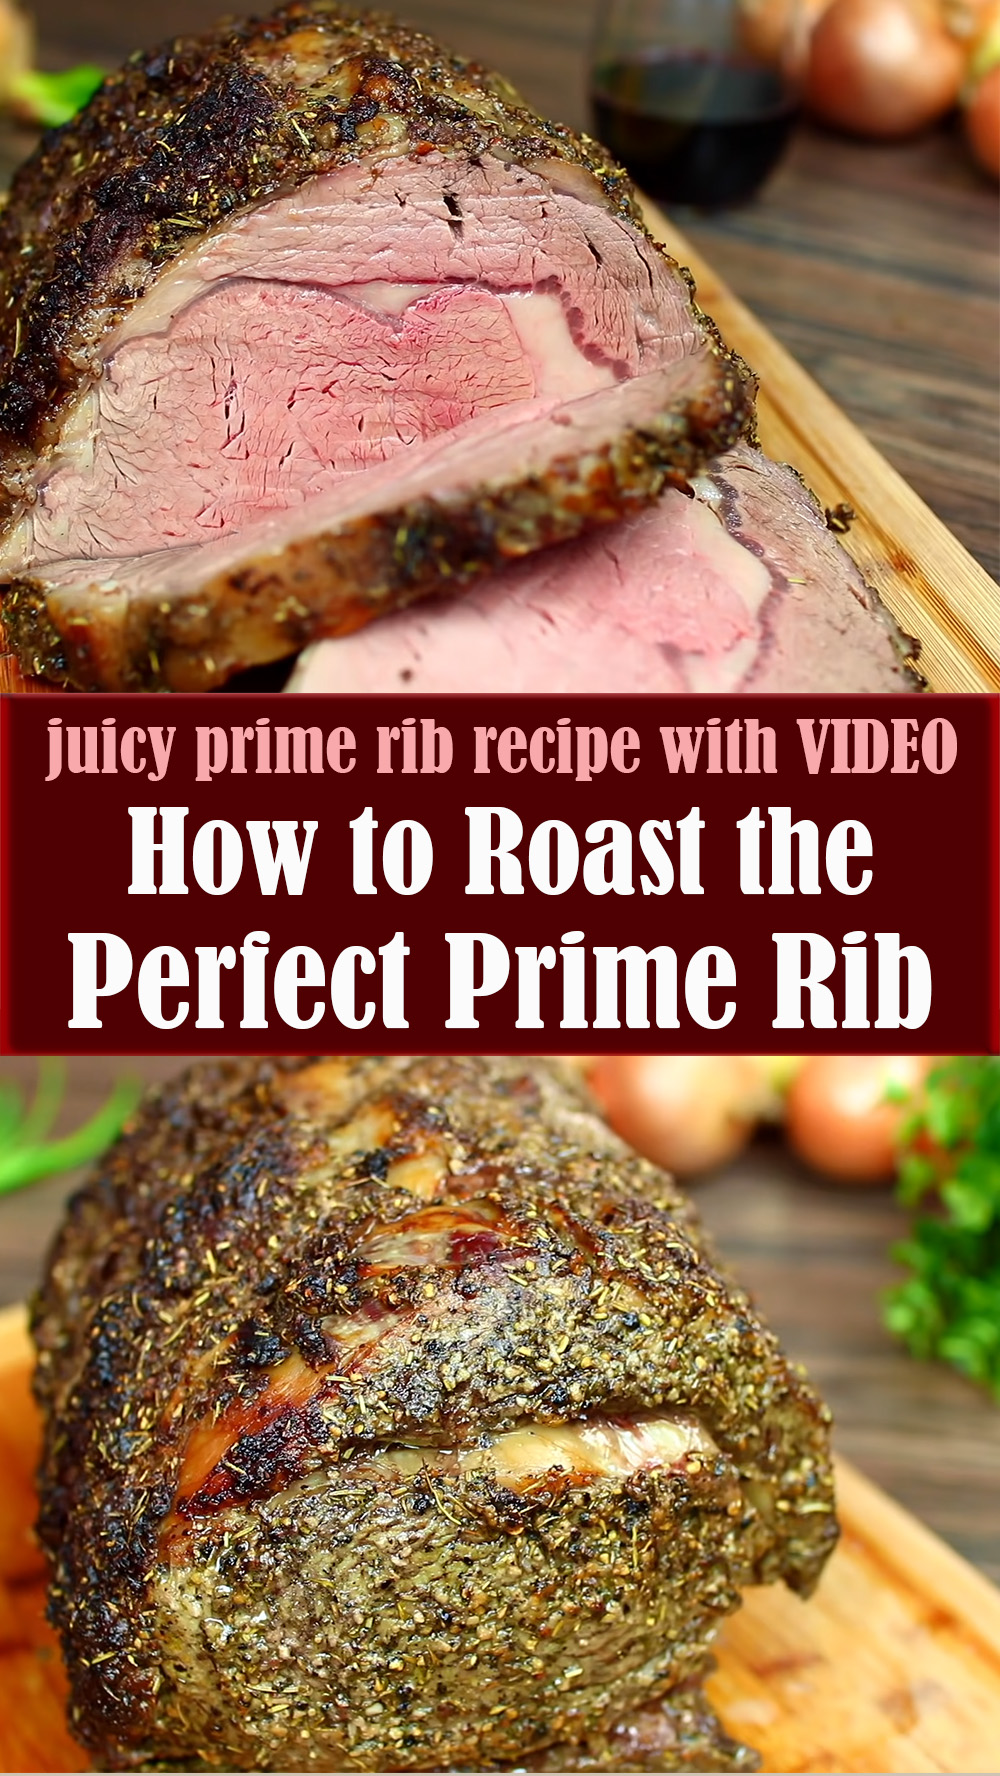 How to Roast the Perfect Prime Rib